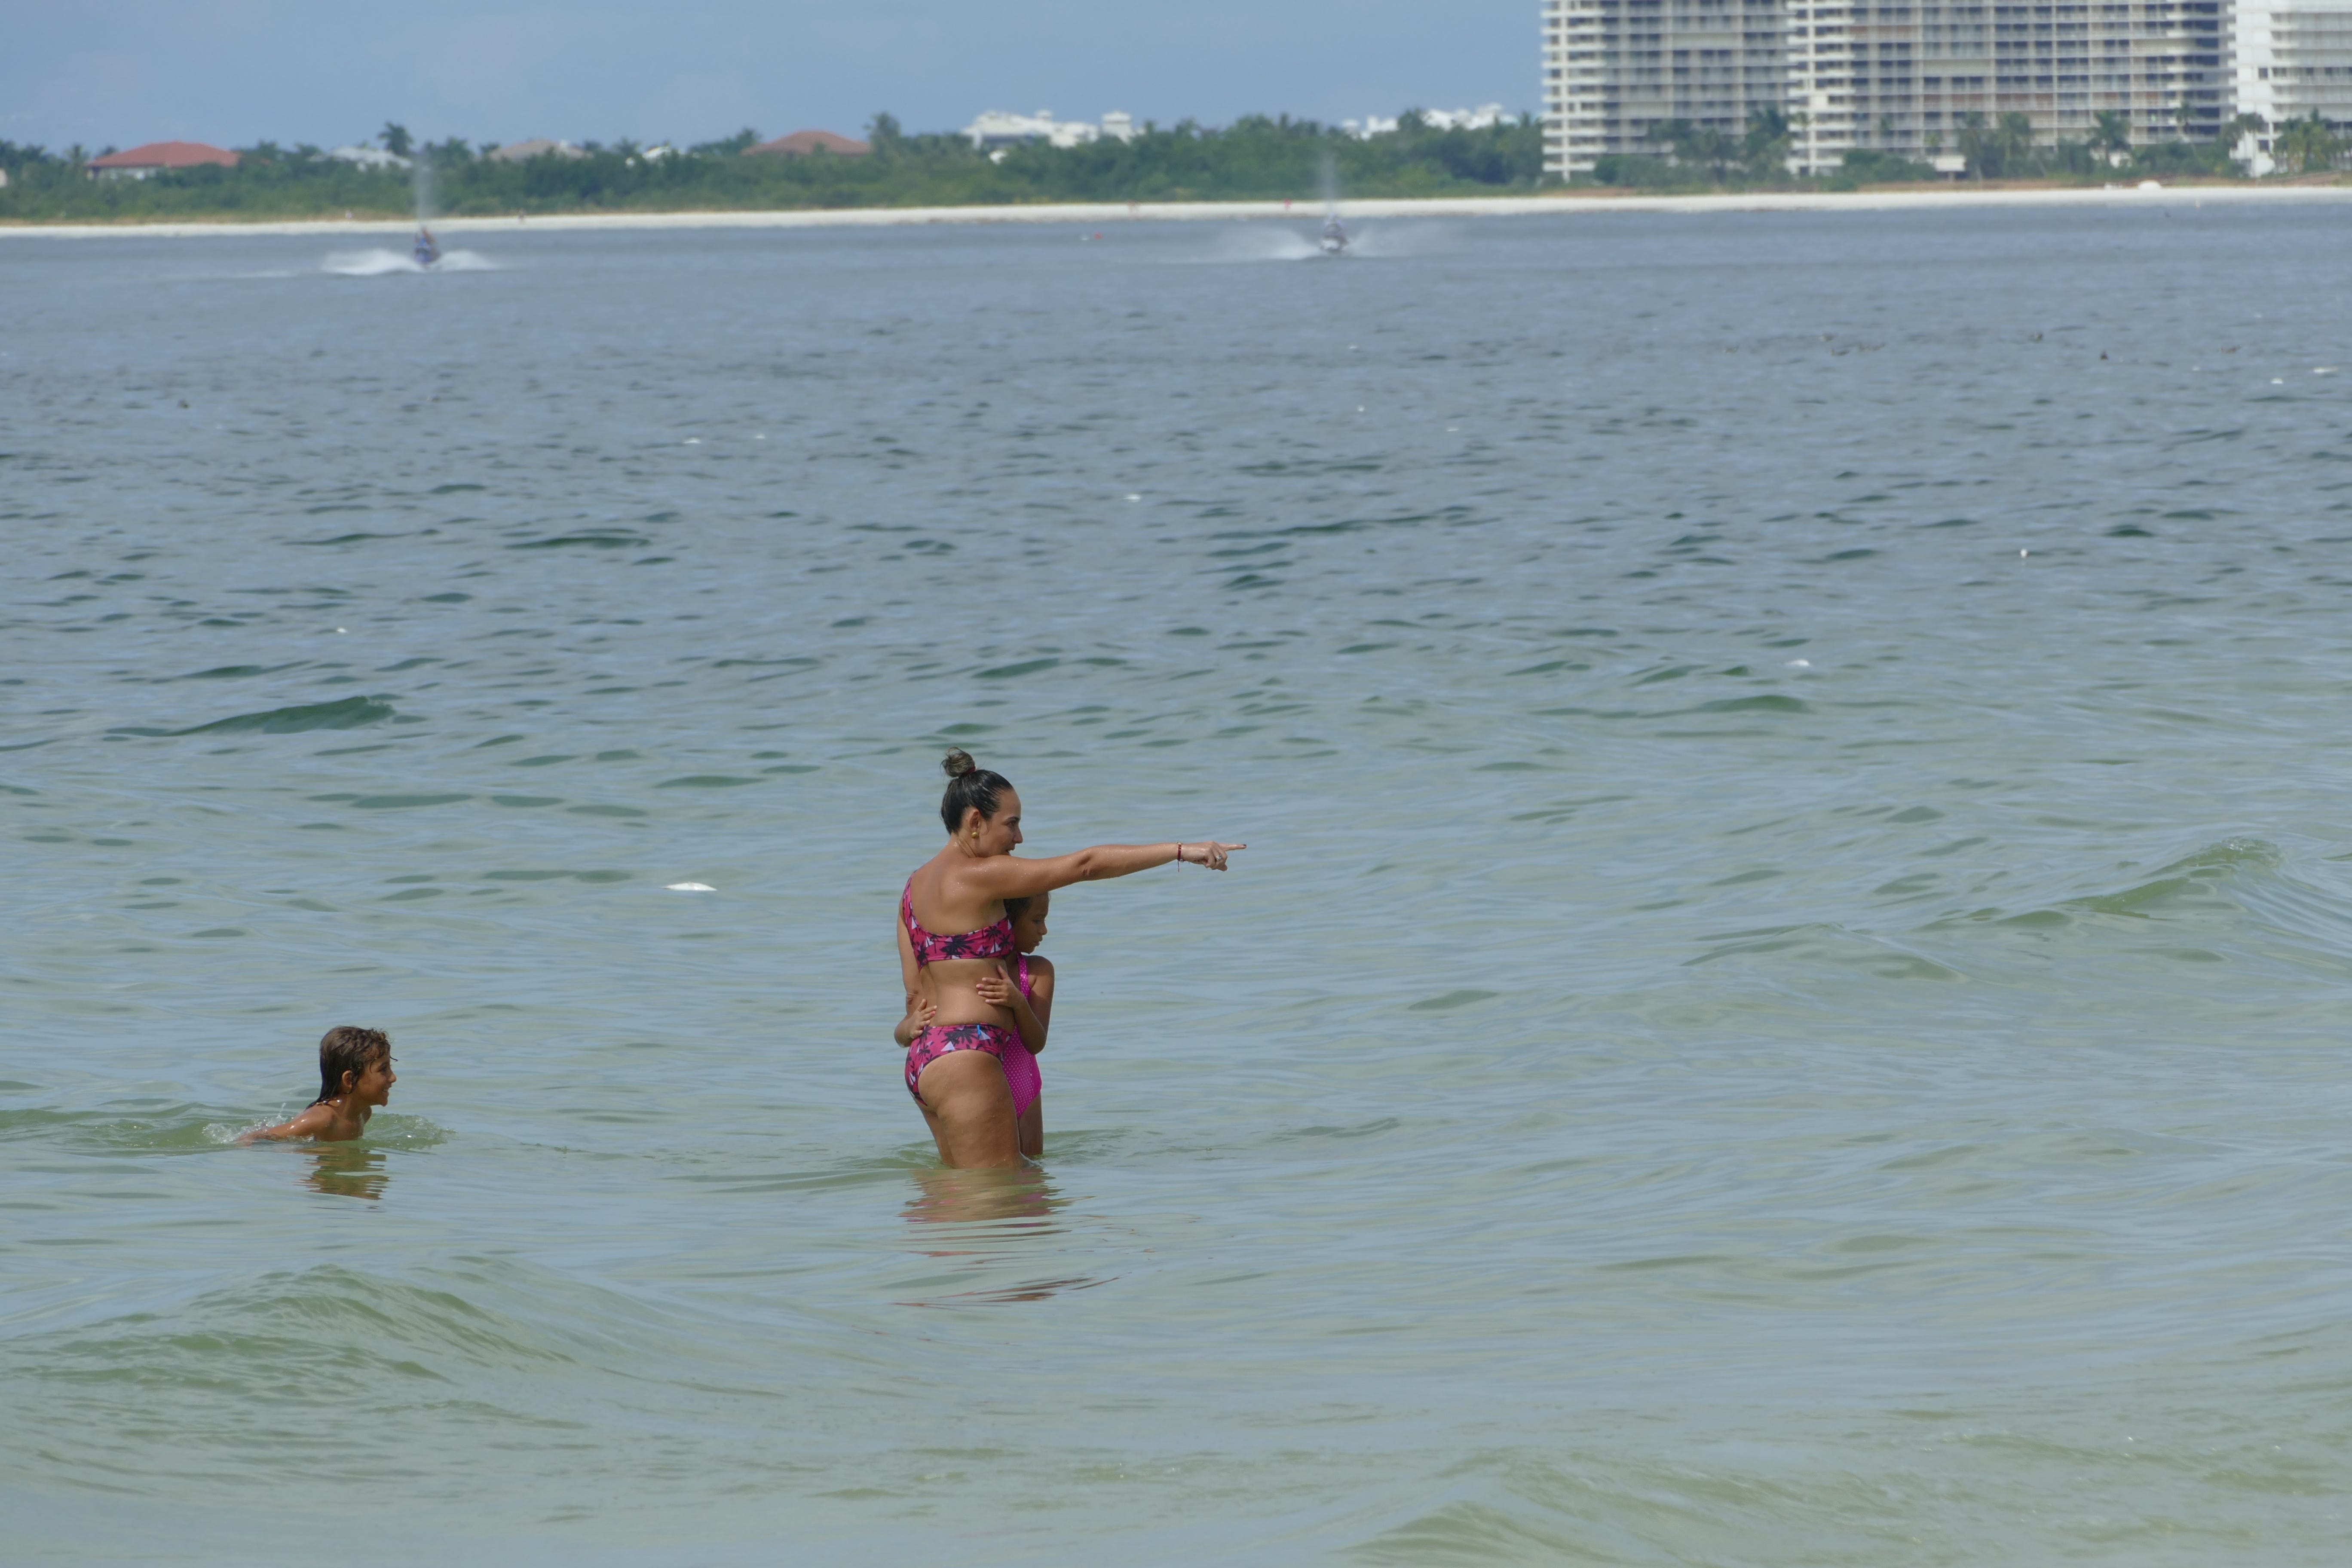 A woman and two kids enjoy the water of South Beach, Marco Island,  on Oct. 9. Dozens of dead fish washed ashore Wednesday on Marco Island as government agencies alerted of high levels of the organism that causes the red tide.